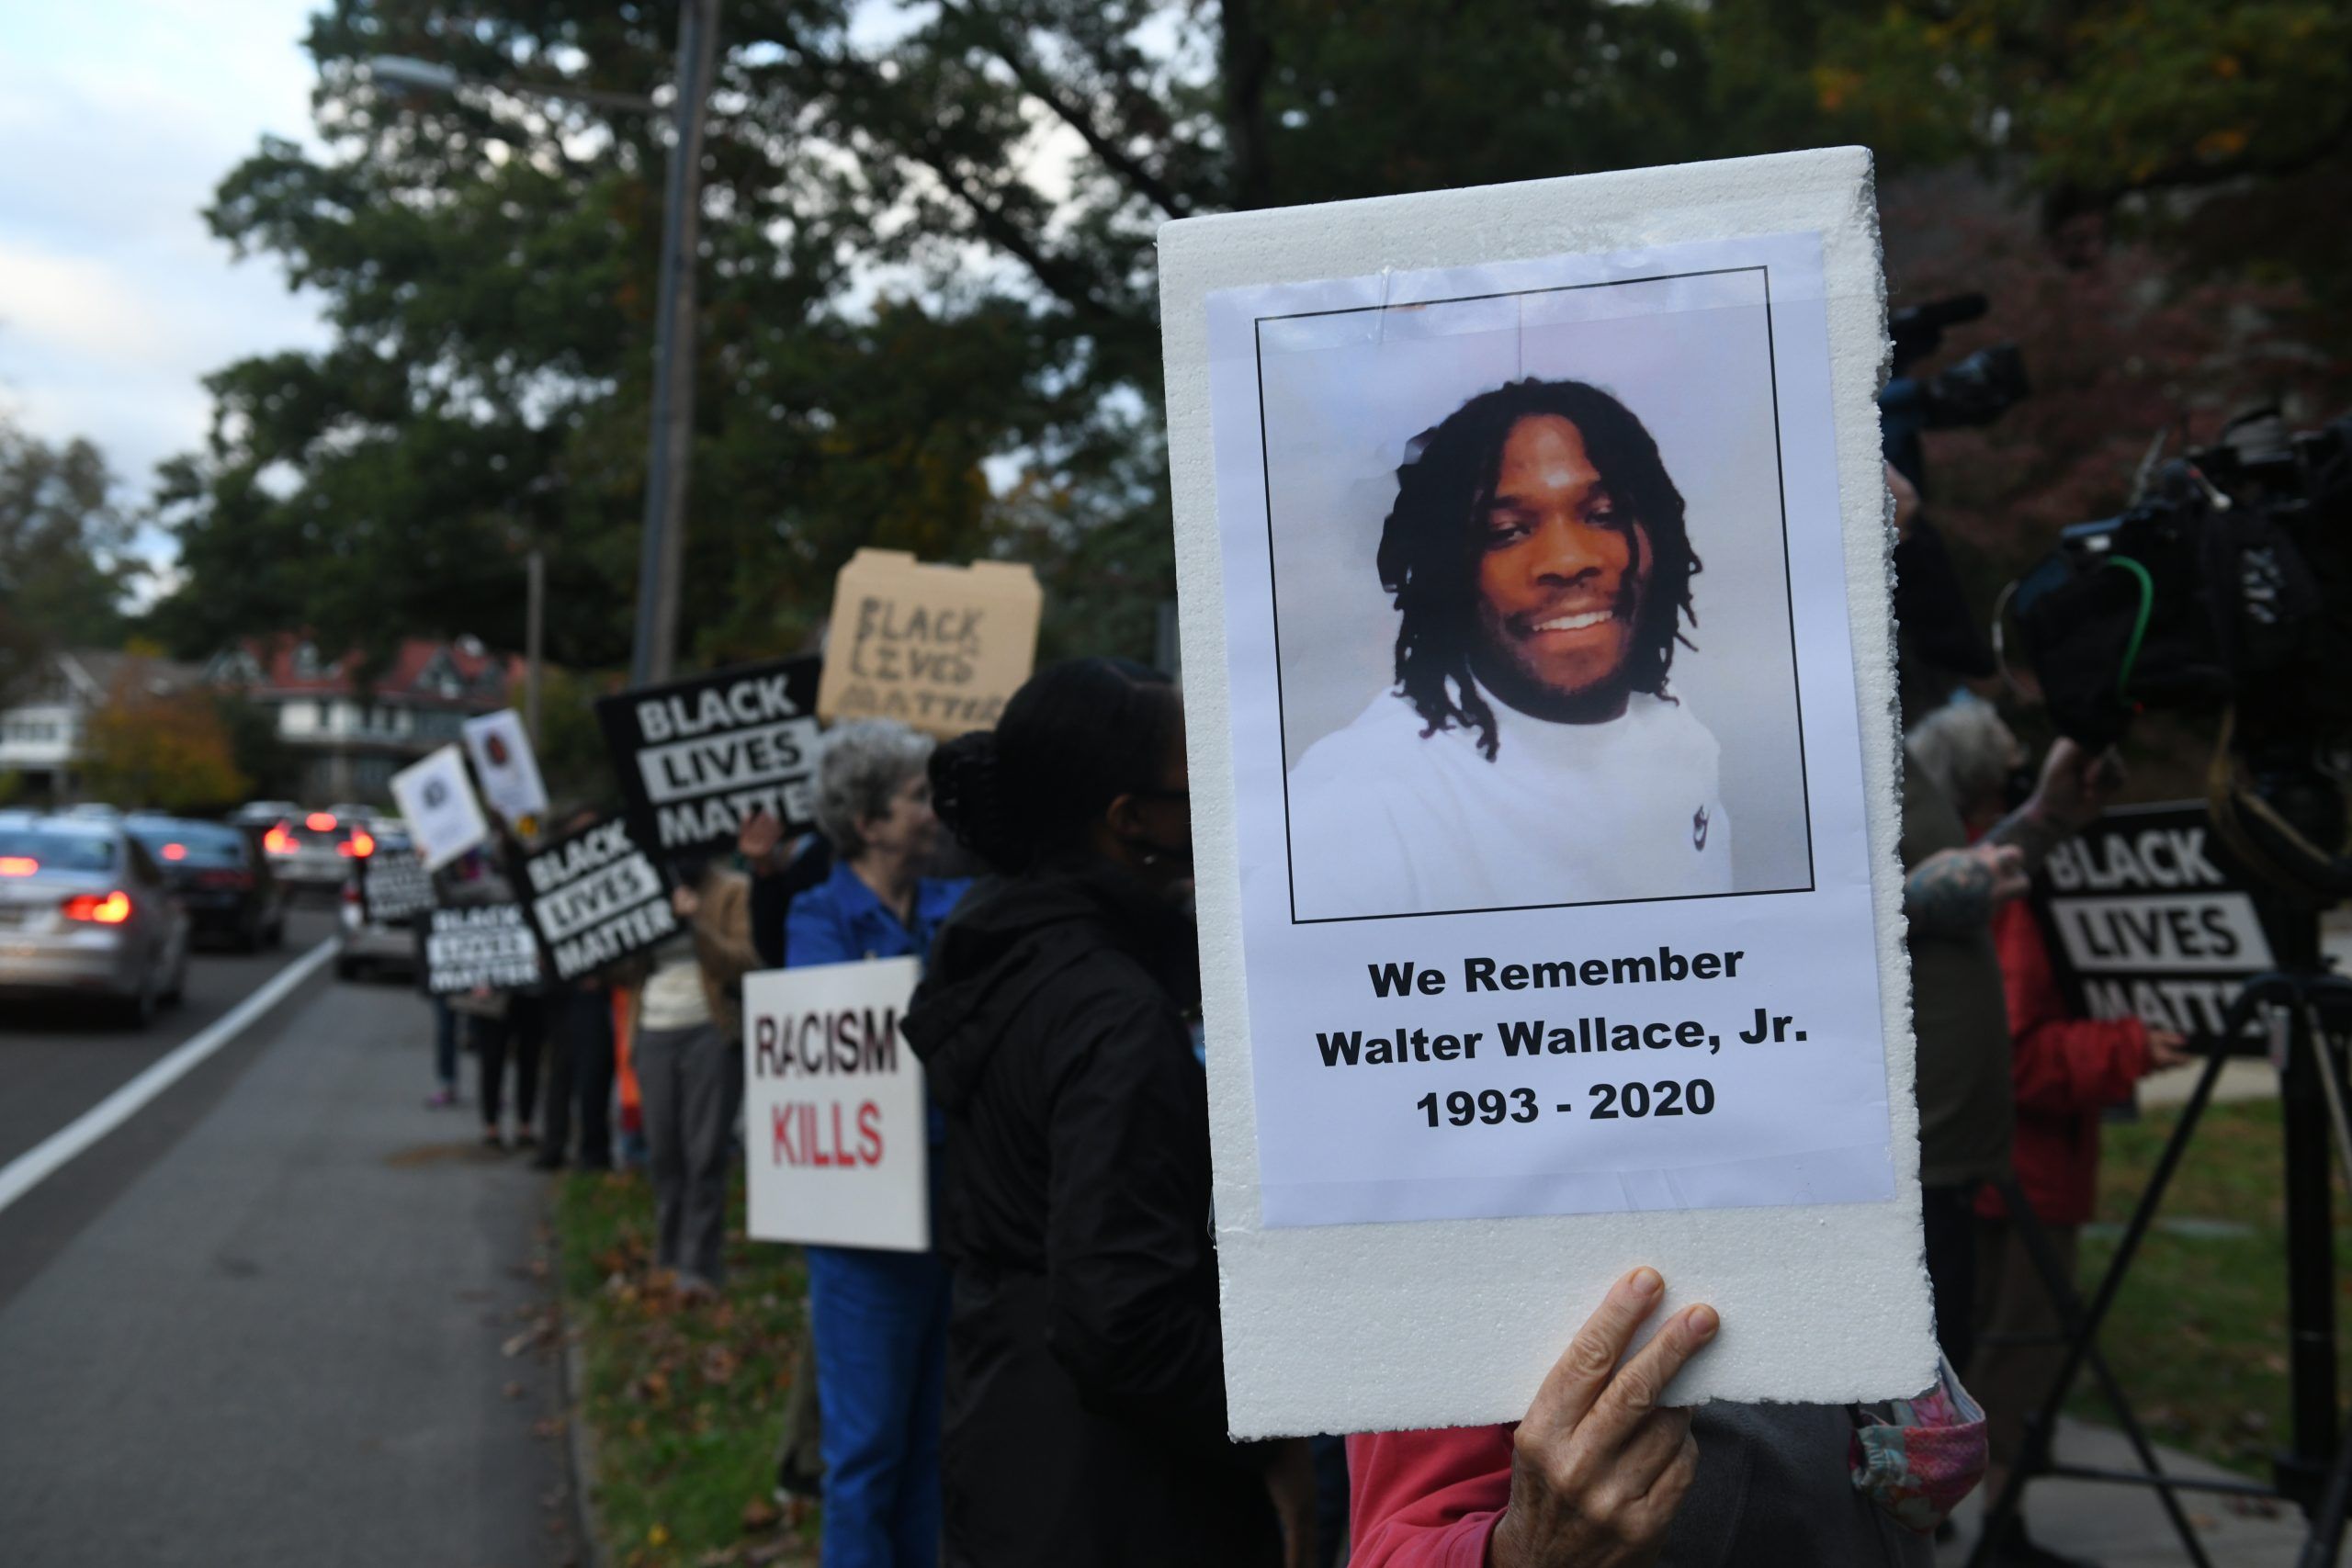 One year after the death of Walter Wallace, Philadelphia comes together to honor his life